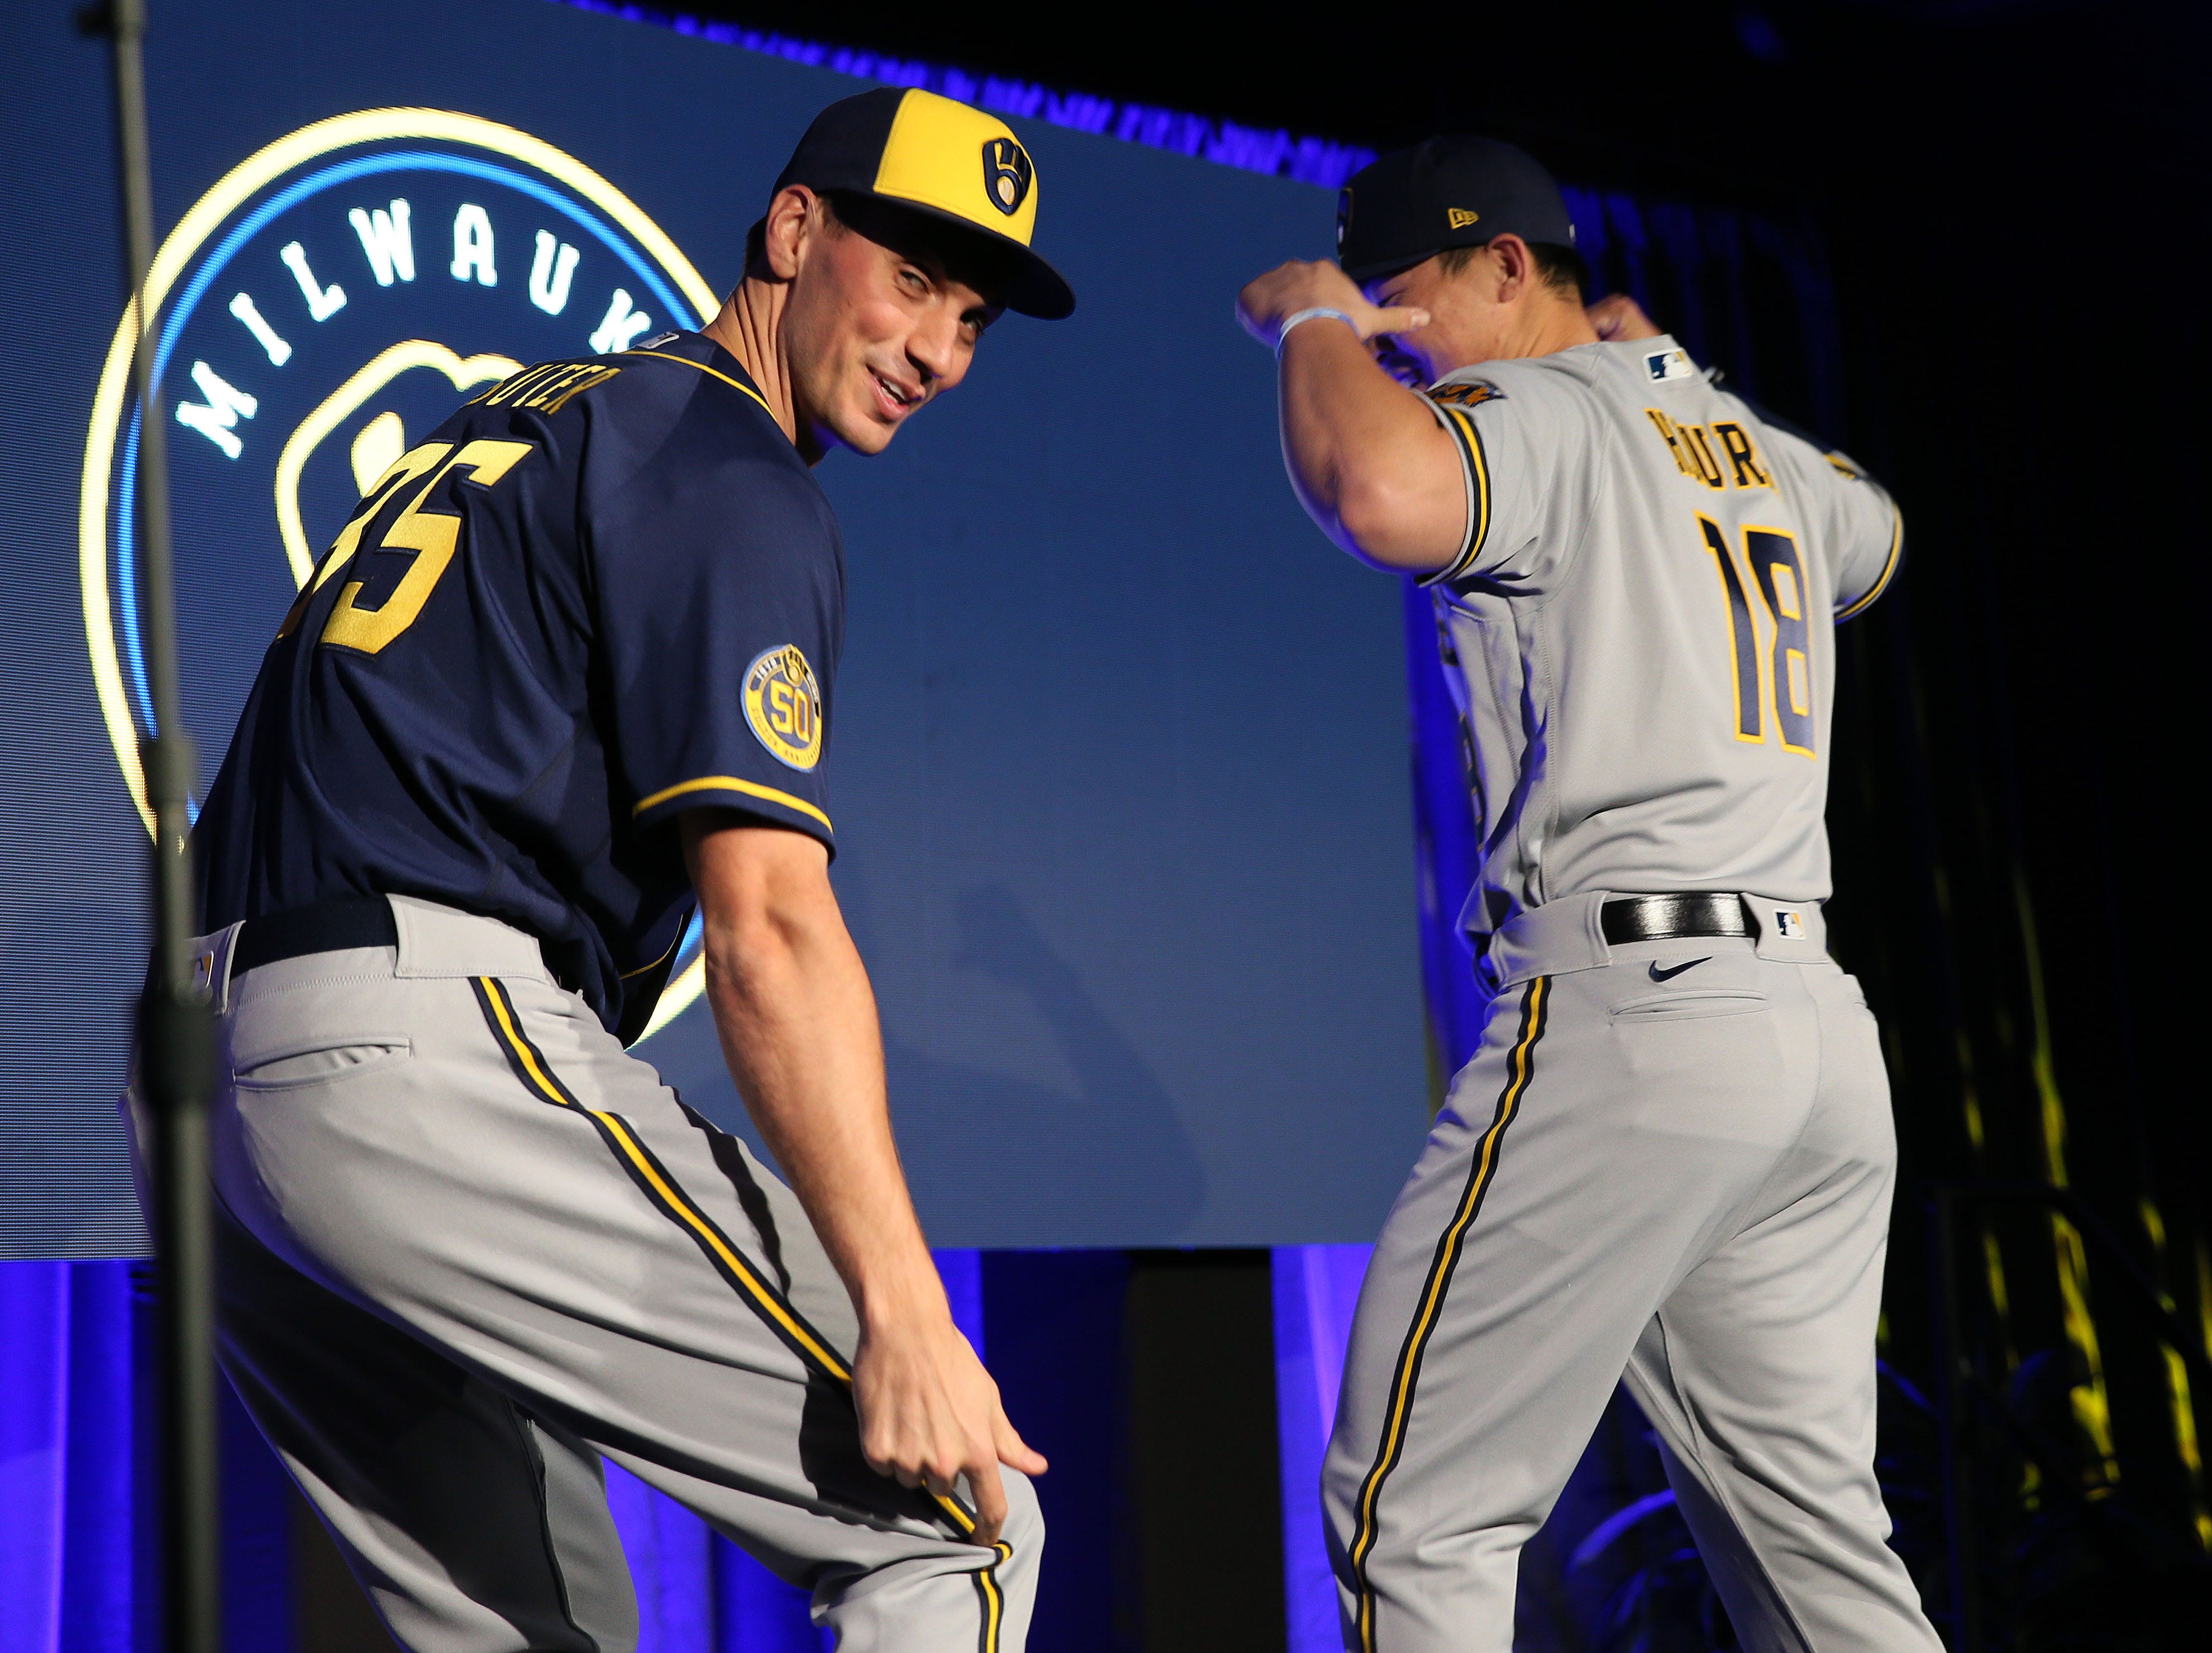 brewers uniforms 2019